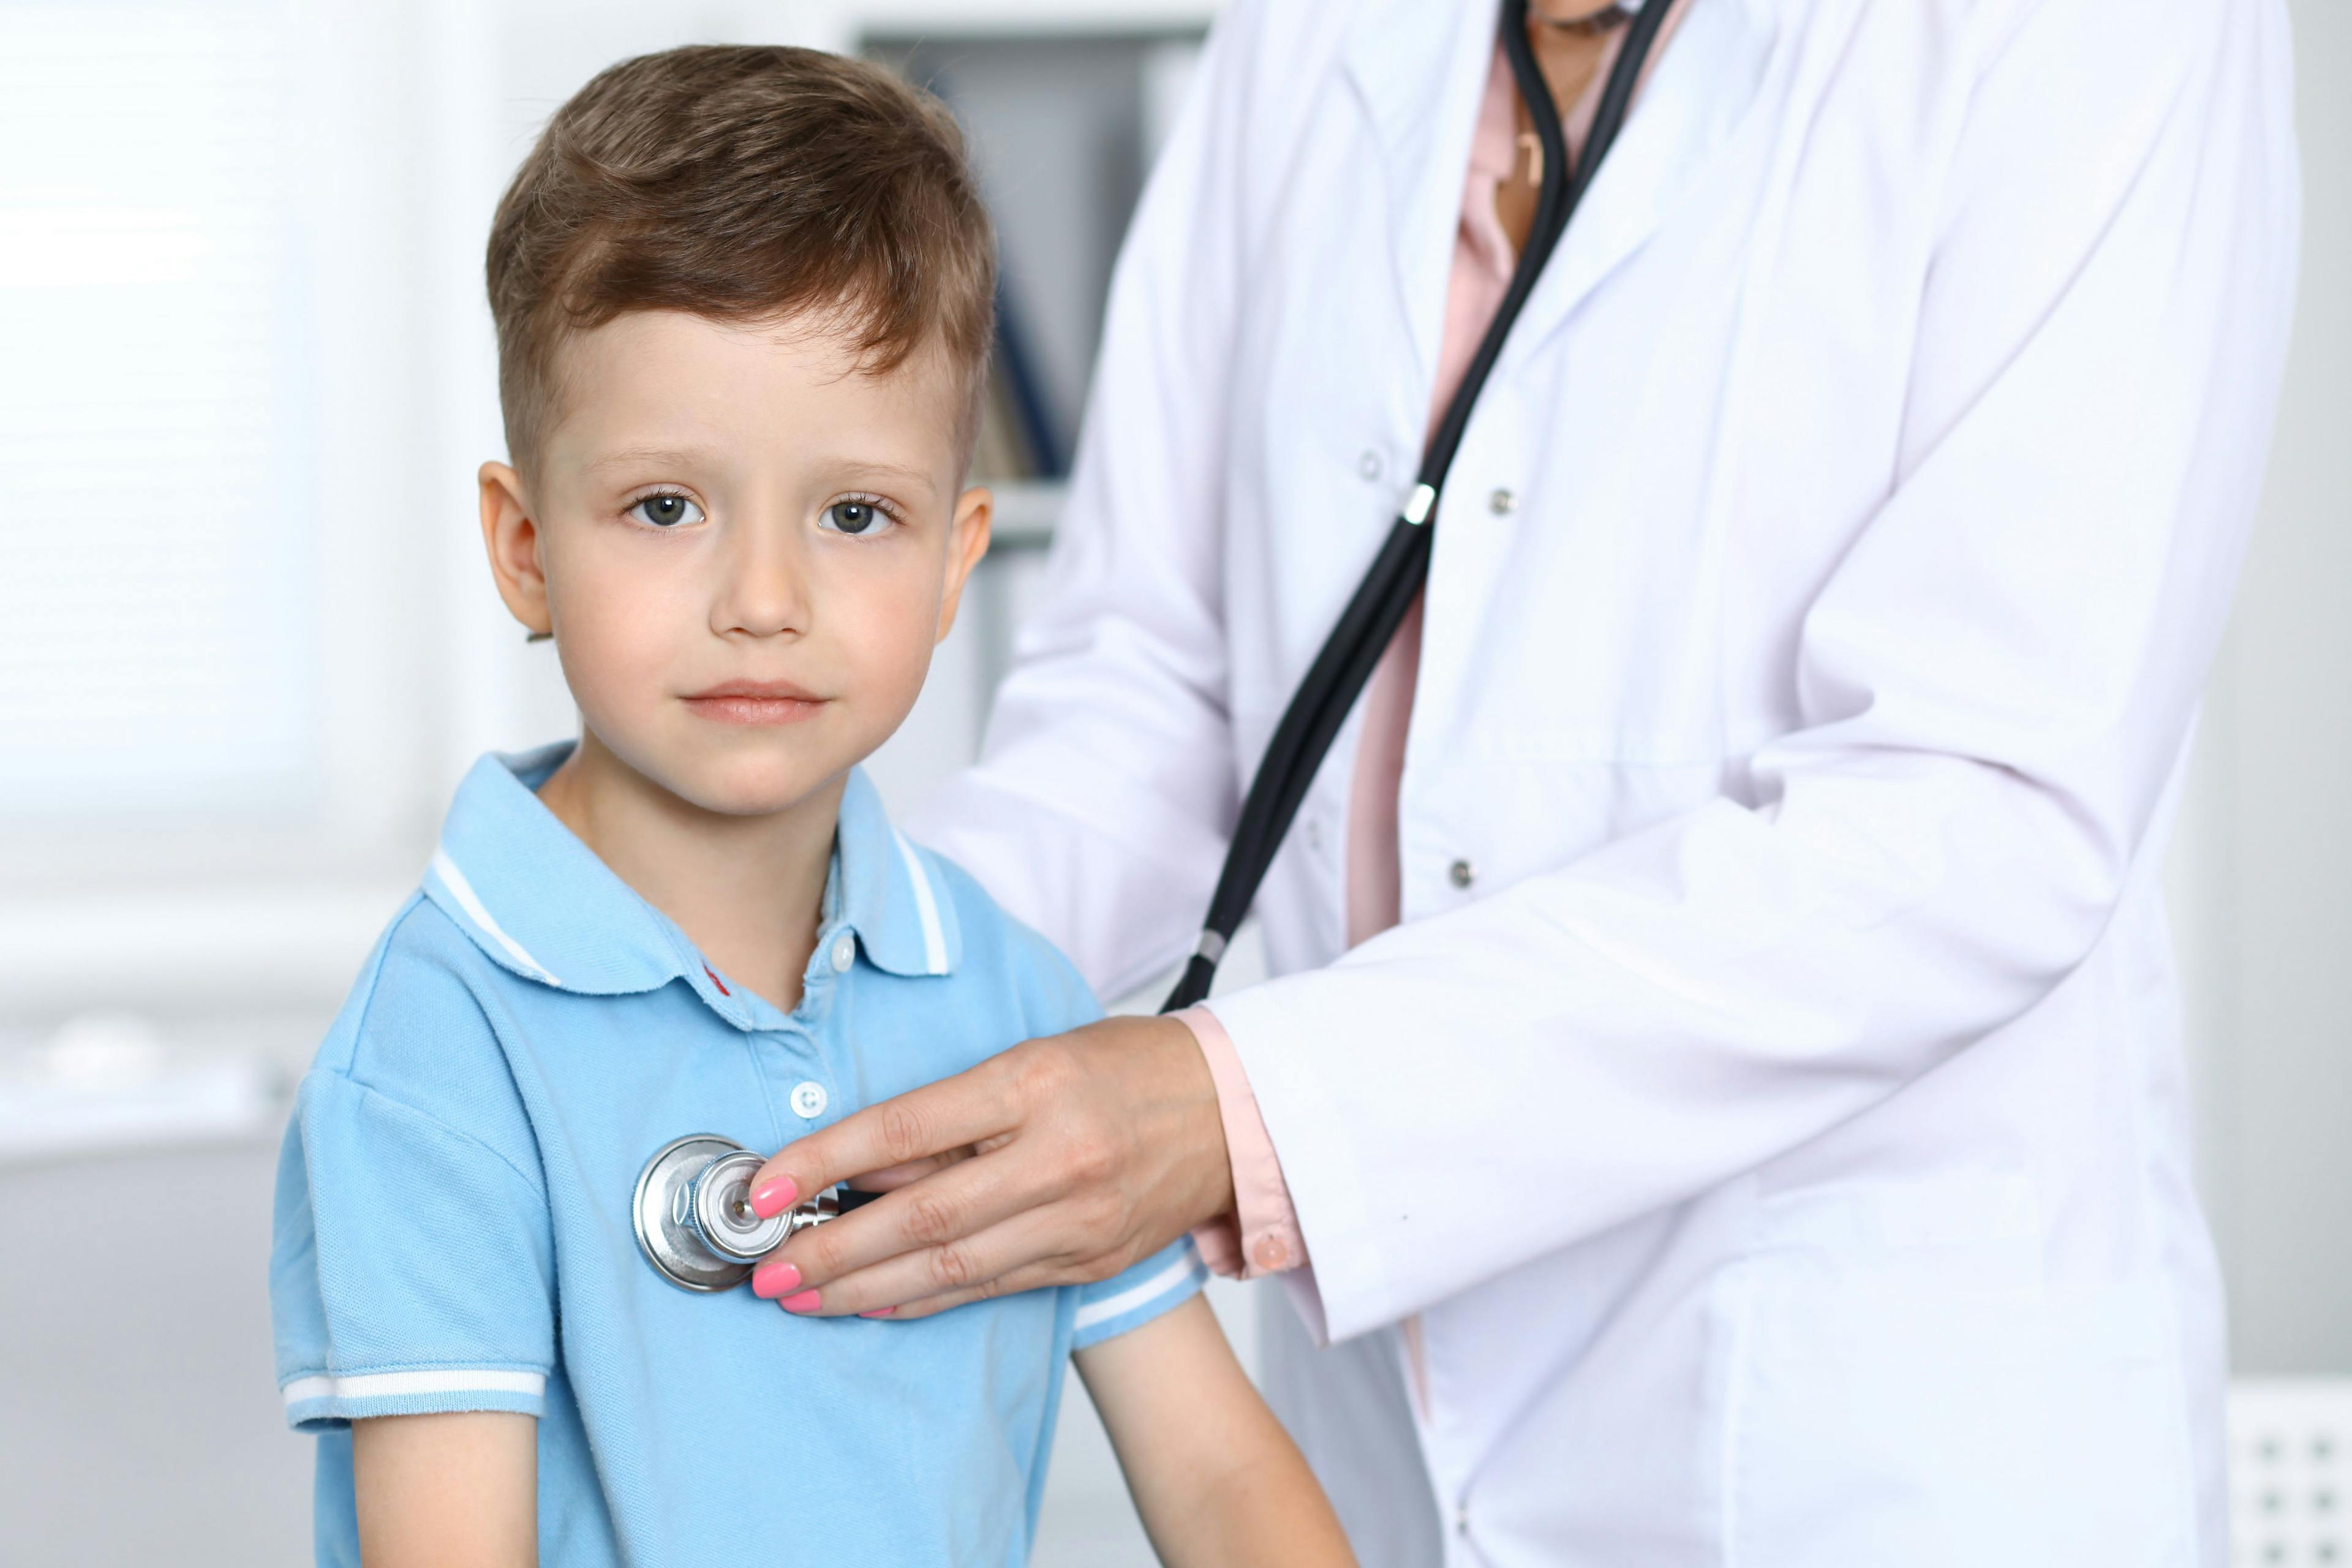 Child evaluated by physician.